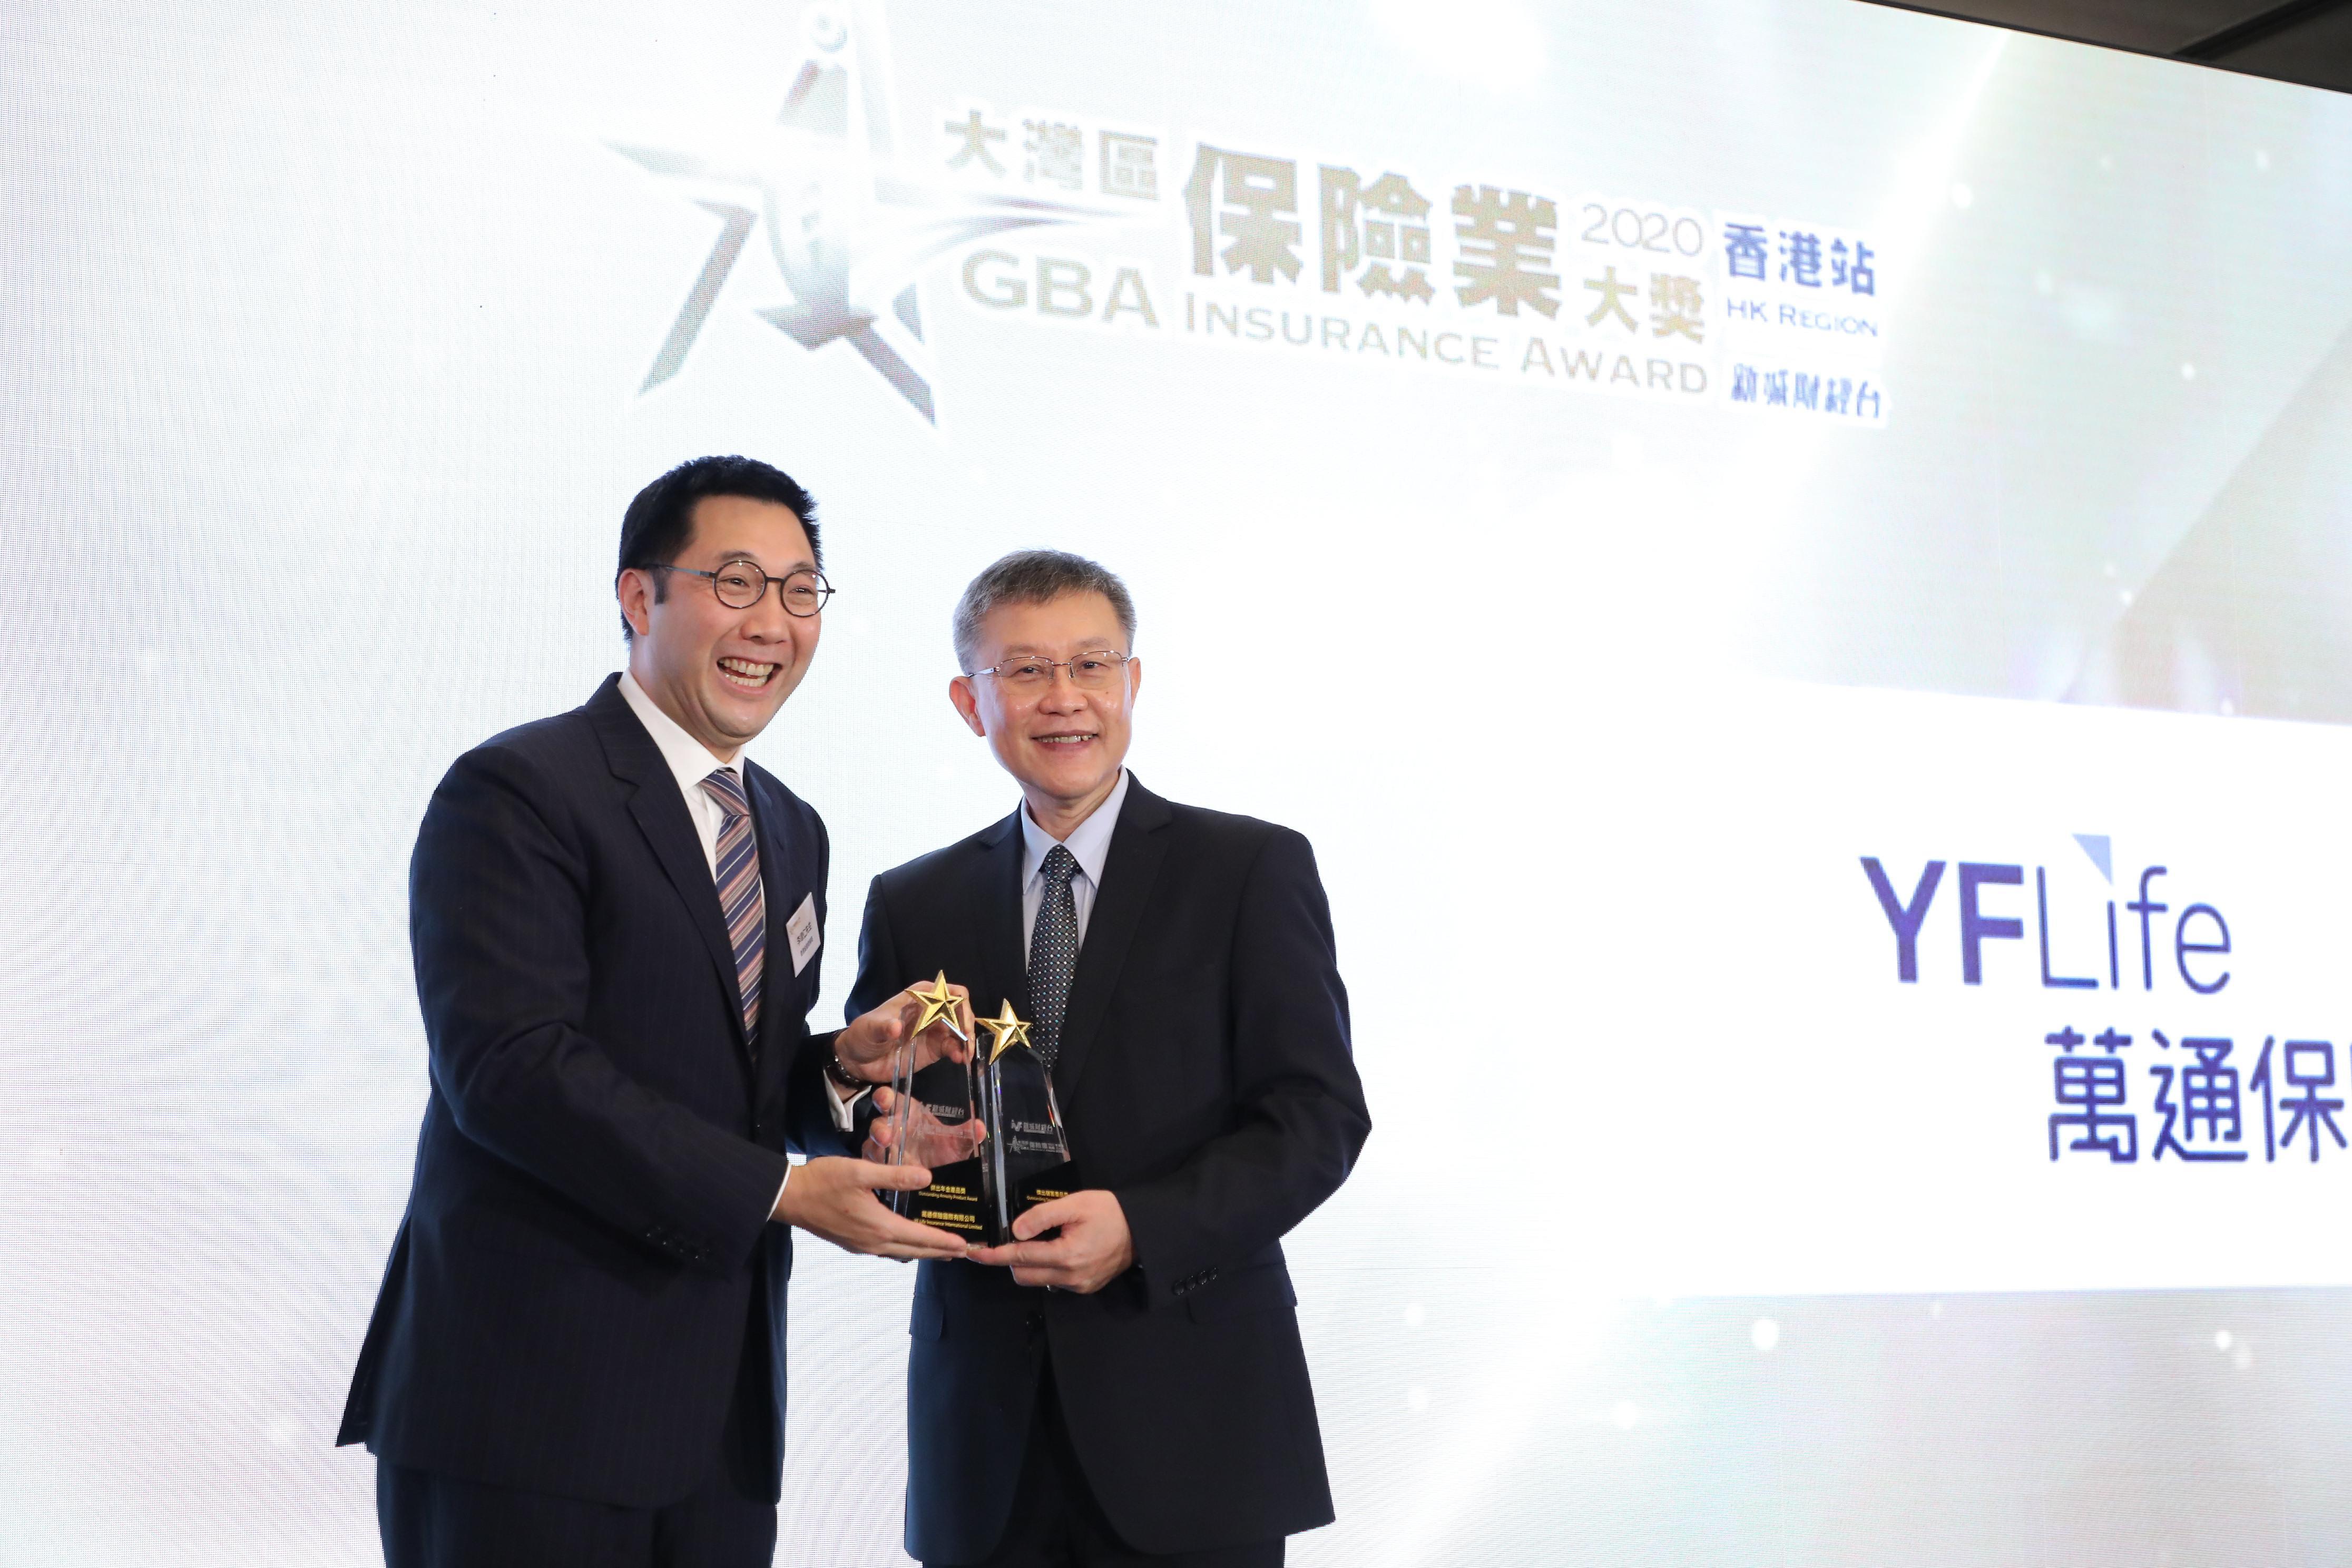 Mr. K.P. Tay, YF Life's Managing Director and Chief Executive Officer, receives the "Outstanding Annuity Product Award” and “Outstanding Savings Product Award” at the the Metro Finance “GBA Insurance Awards 2020 – HK Region” presentation ceremony. 